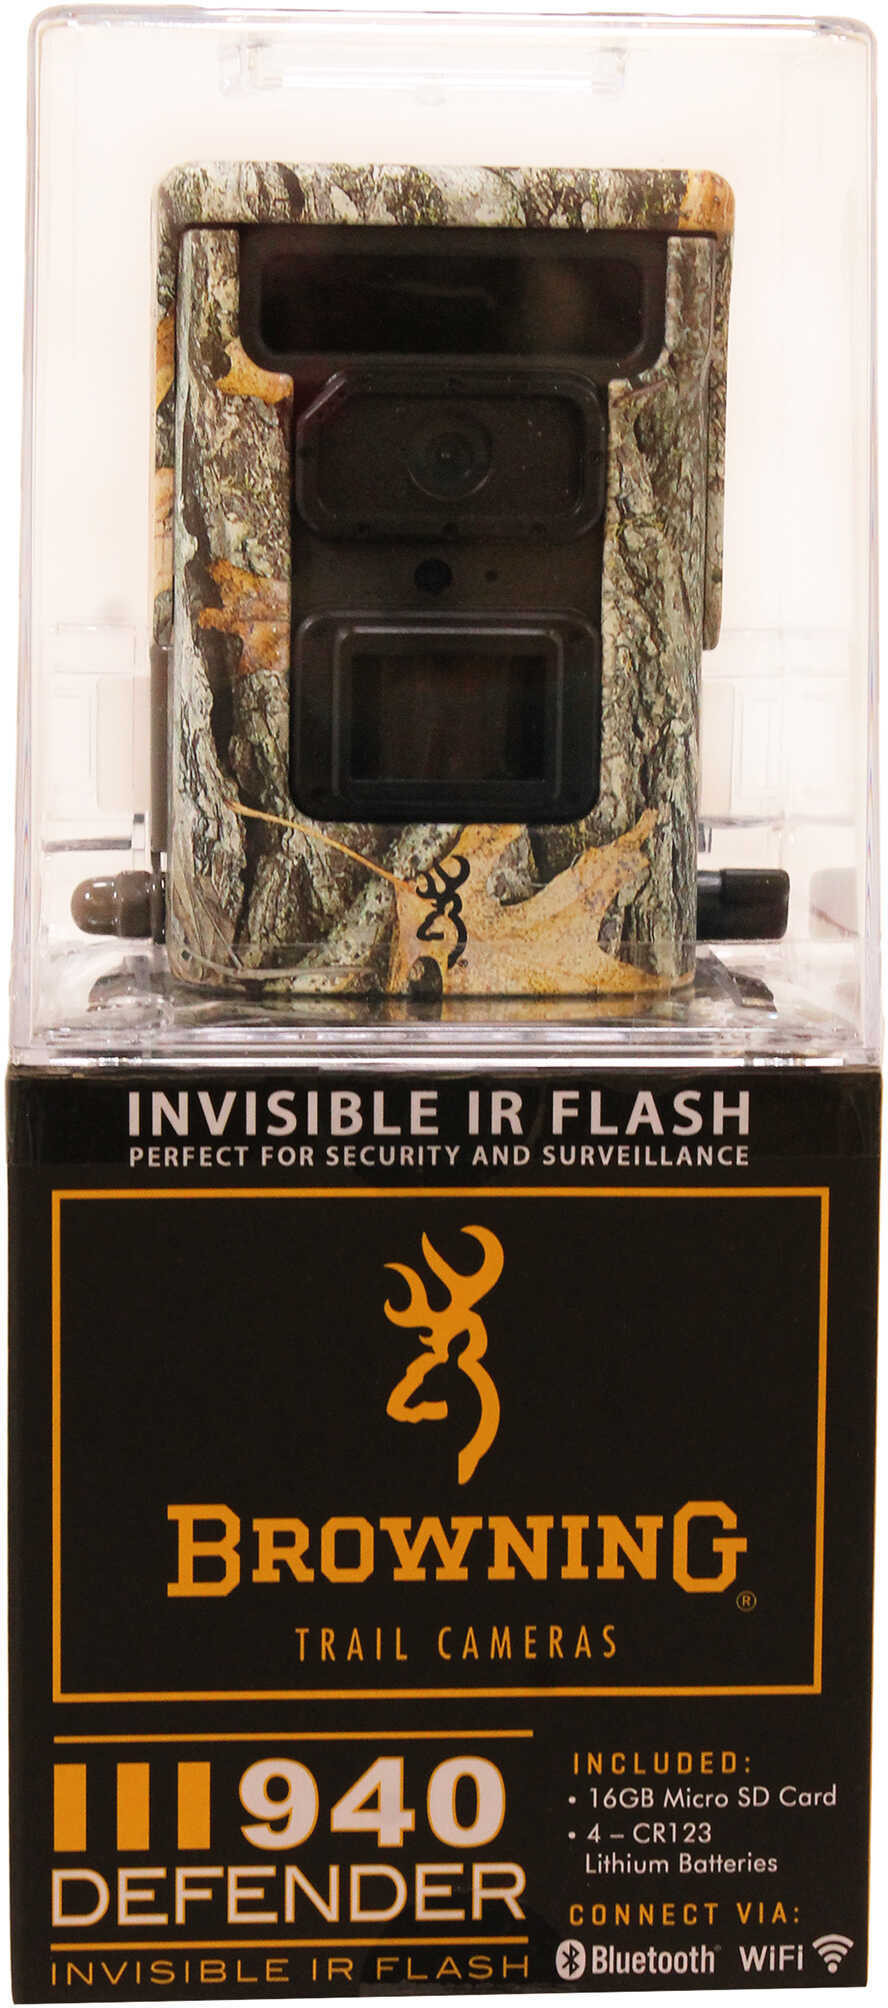 Browning Defender 940 20MP Trail Camera with Memory Card and Batteries Camo Connects to Phone with WiFi or Bluetooth 